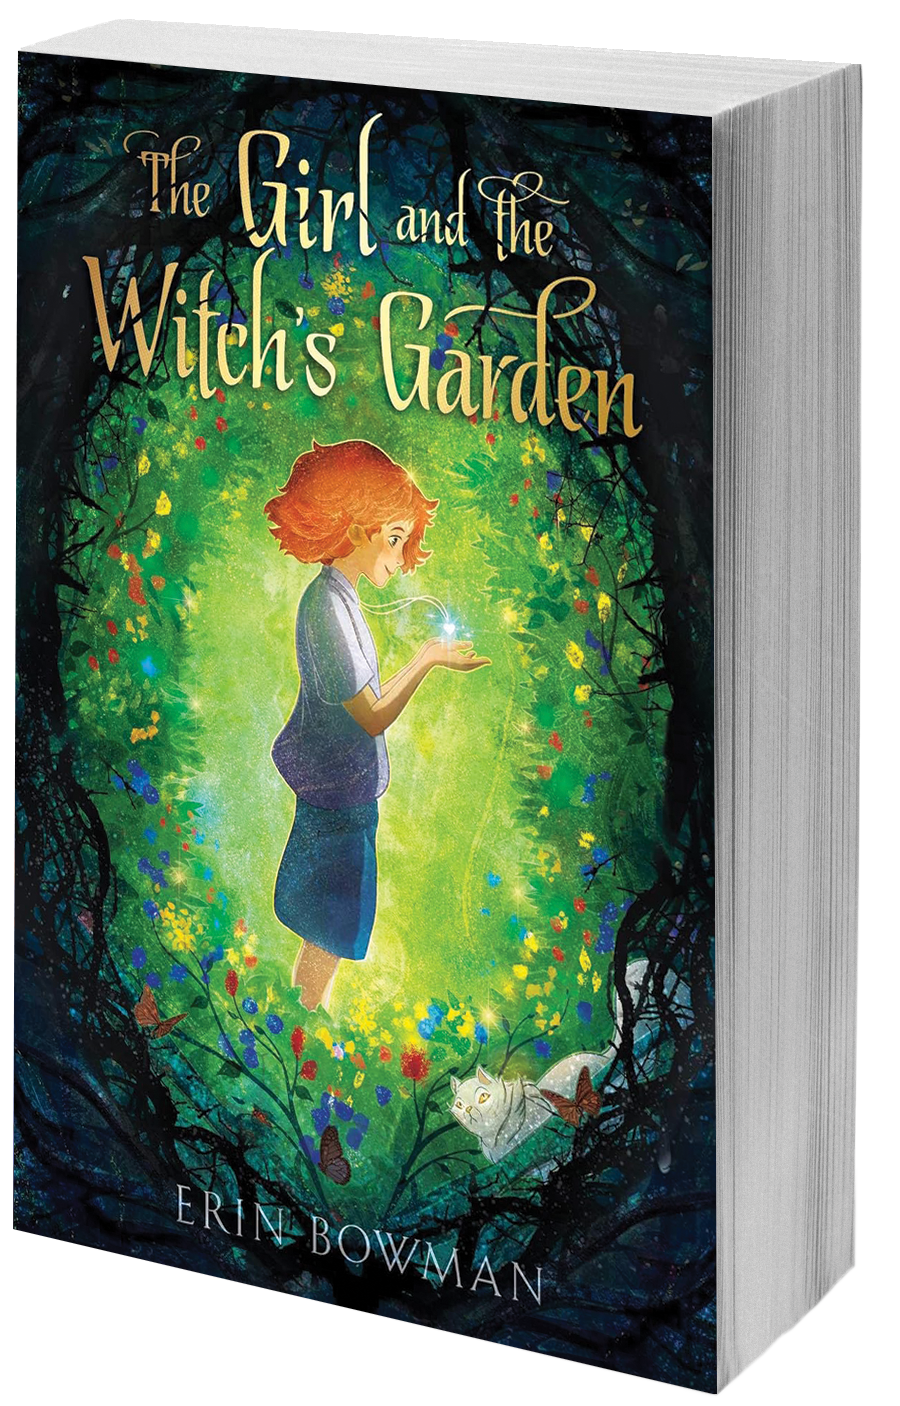 the girl and the witch's garden